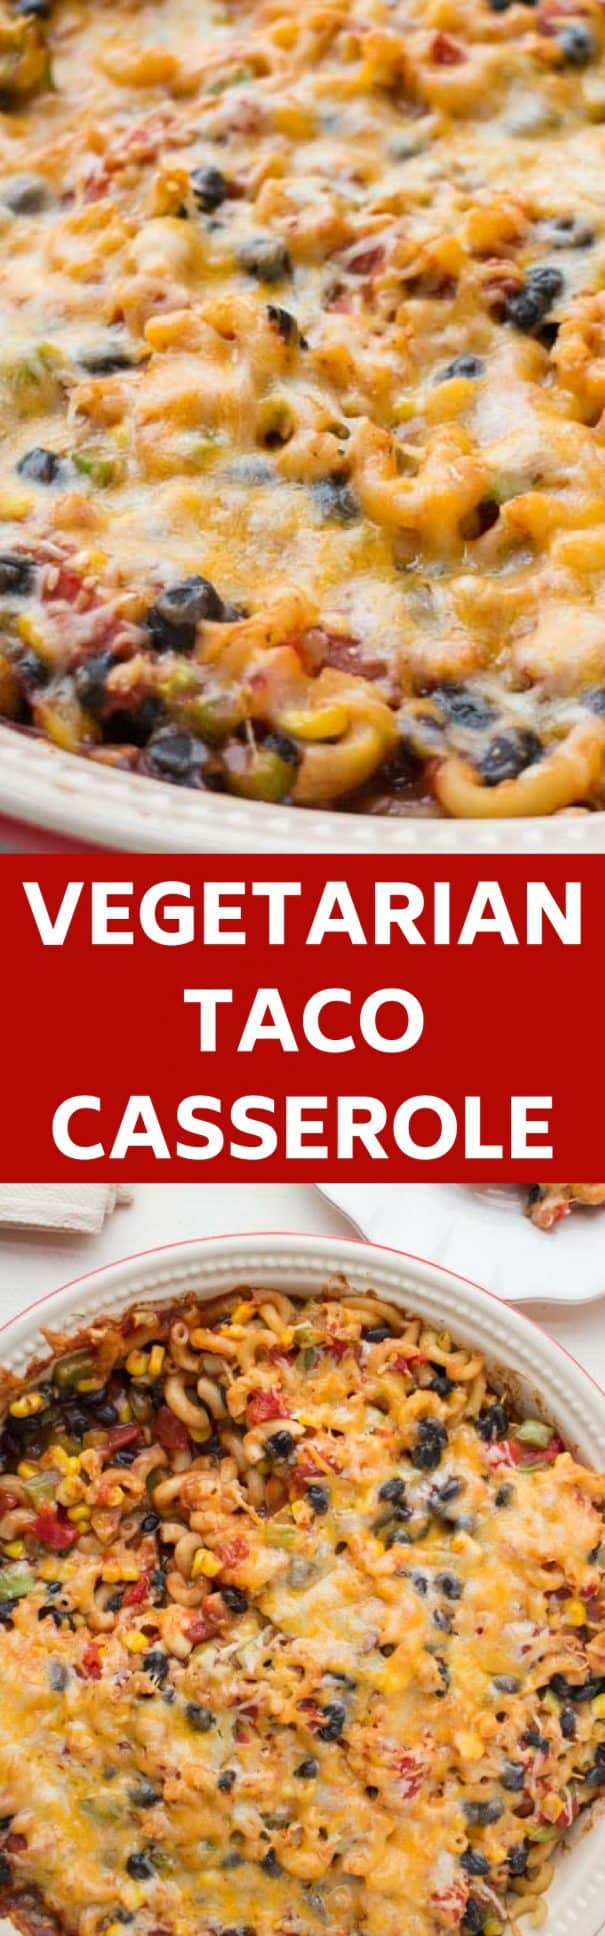 Easy to make Vegetarian Taco Casserole recipe. Instead of meat, we use lots of vegetables and beans. This Mexican Casserole takes 30 minutes to bake.